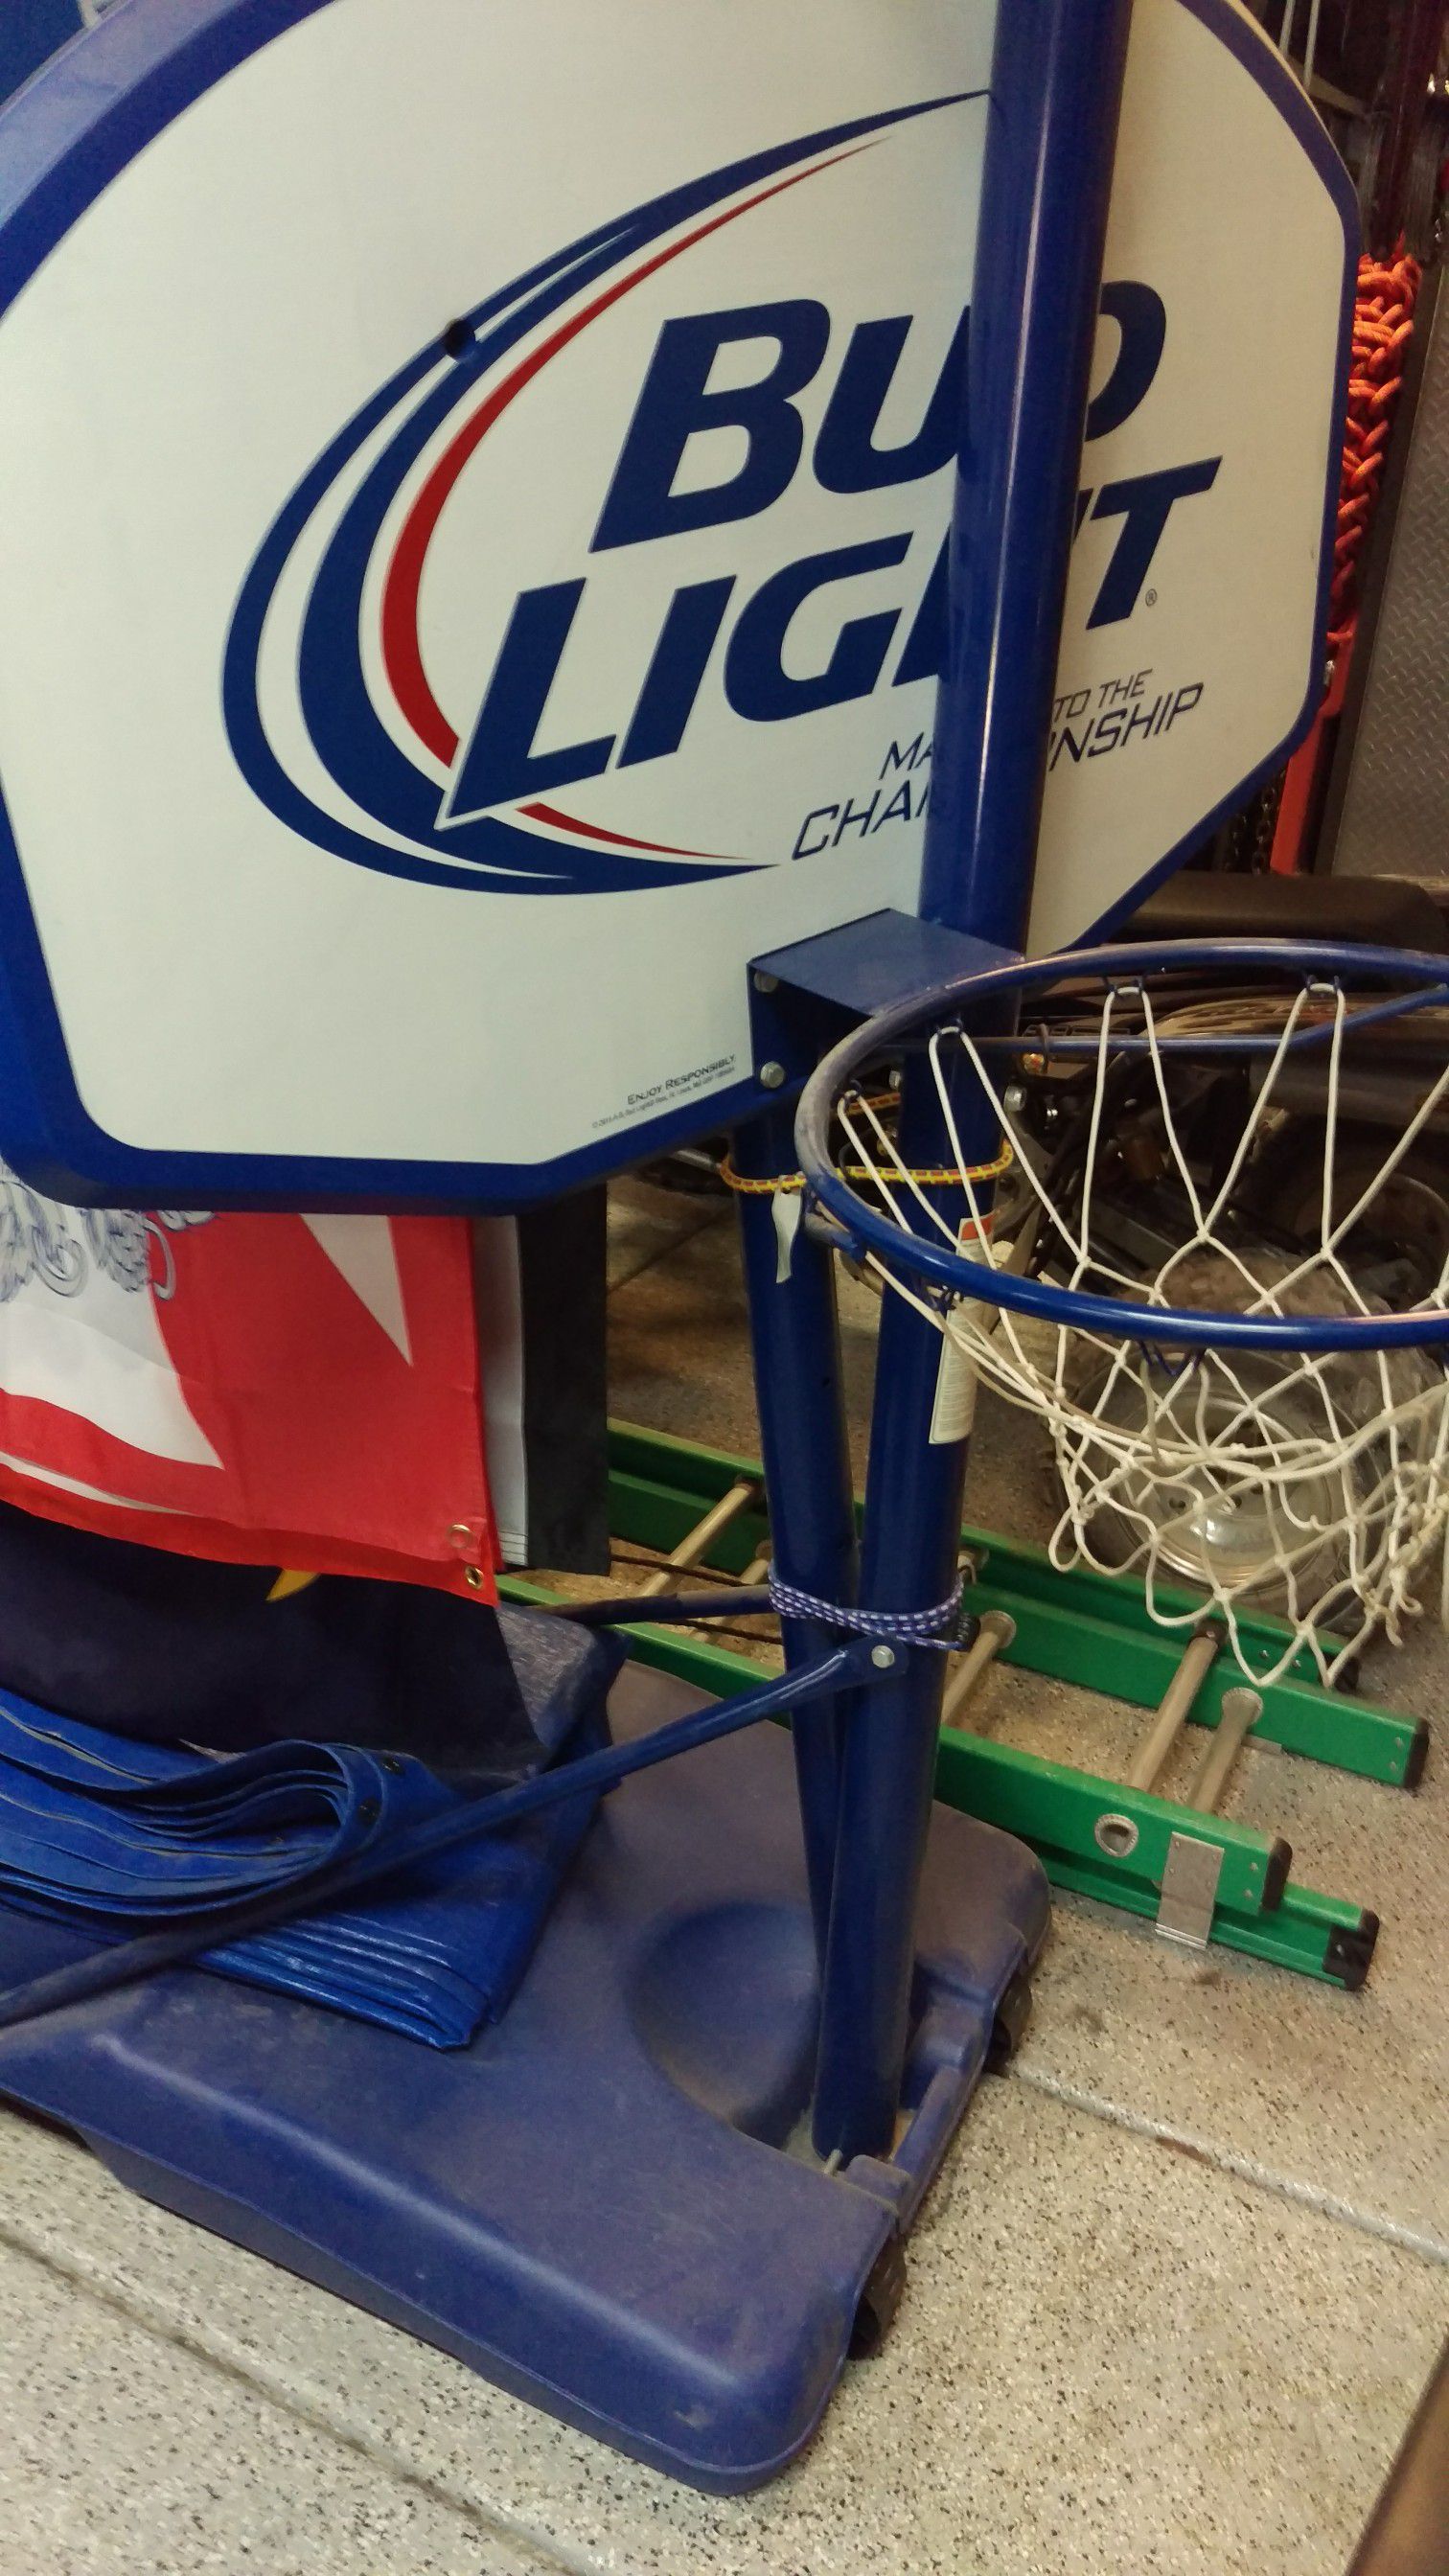 Mancave basketball hoop New Bud collectible